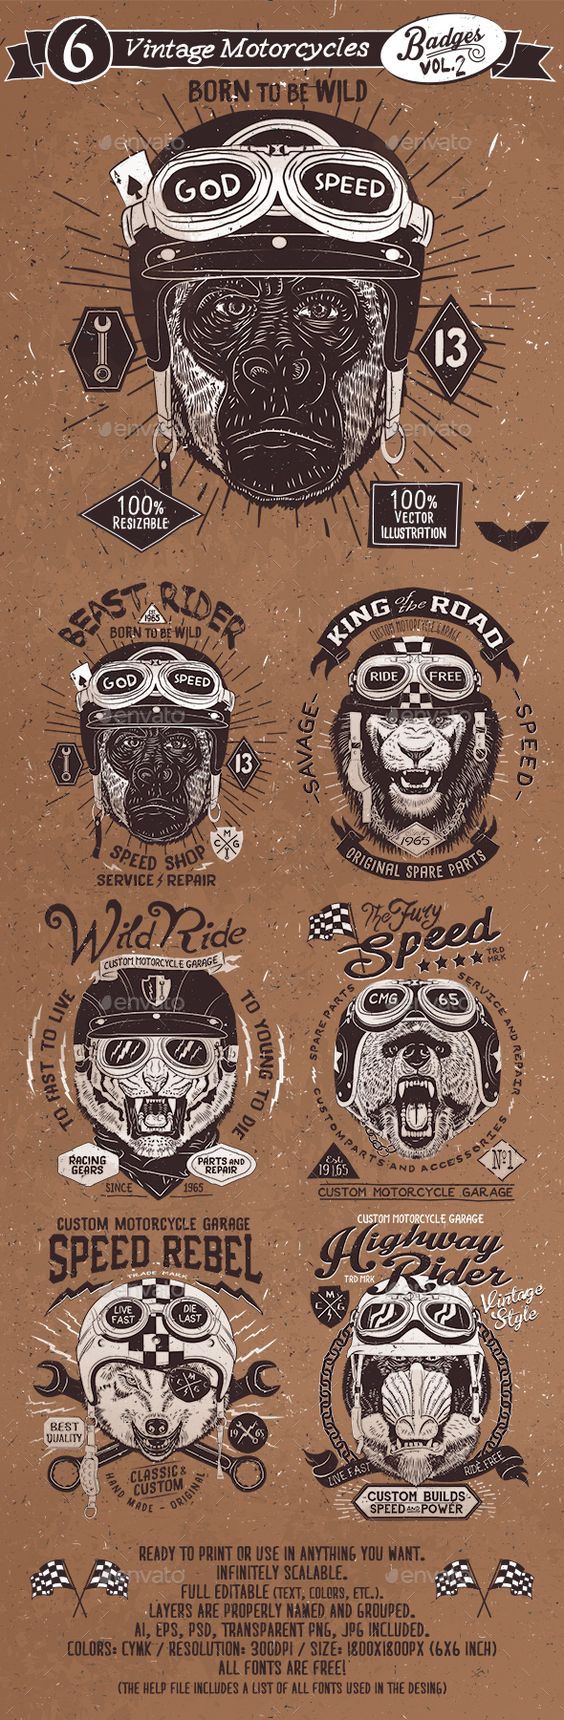 6 Vintage Motorcycles Badges Template PSD, Vector EPS, AI. Download here: